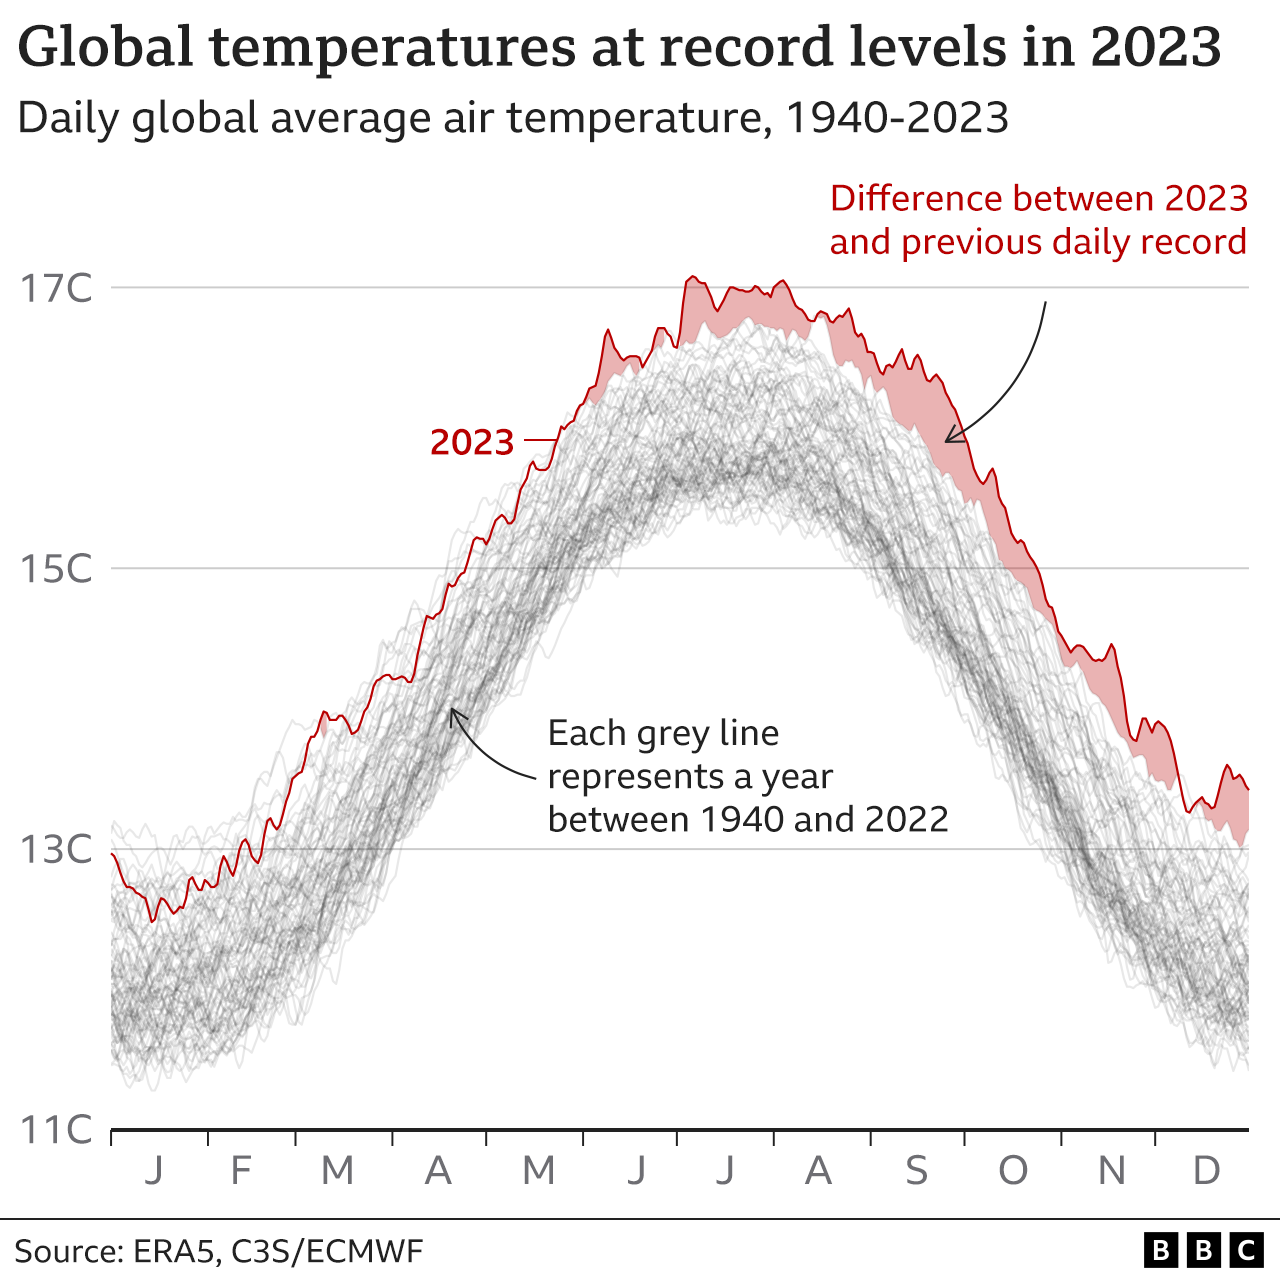 Multiple line chart showing daily average global air temperature, with a line for each year between 1940 and 2023. The 2023 line is far above any previous level for much of the second half of the year.